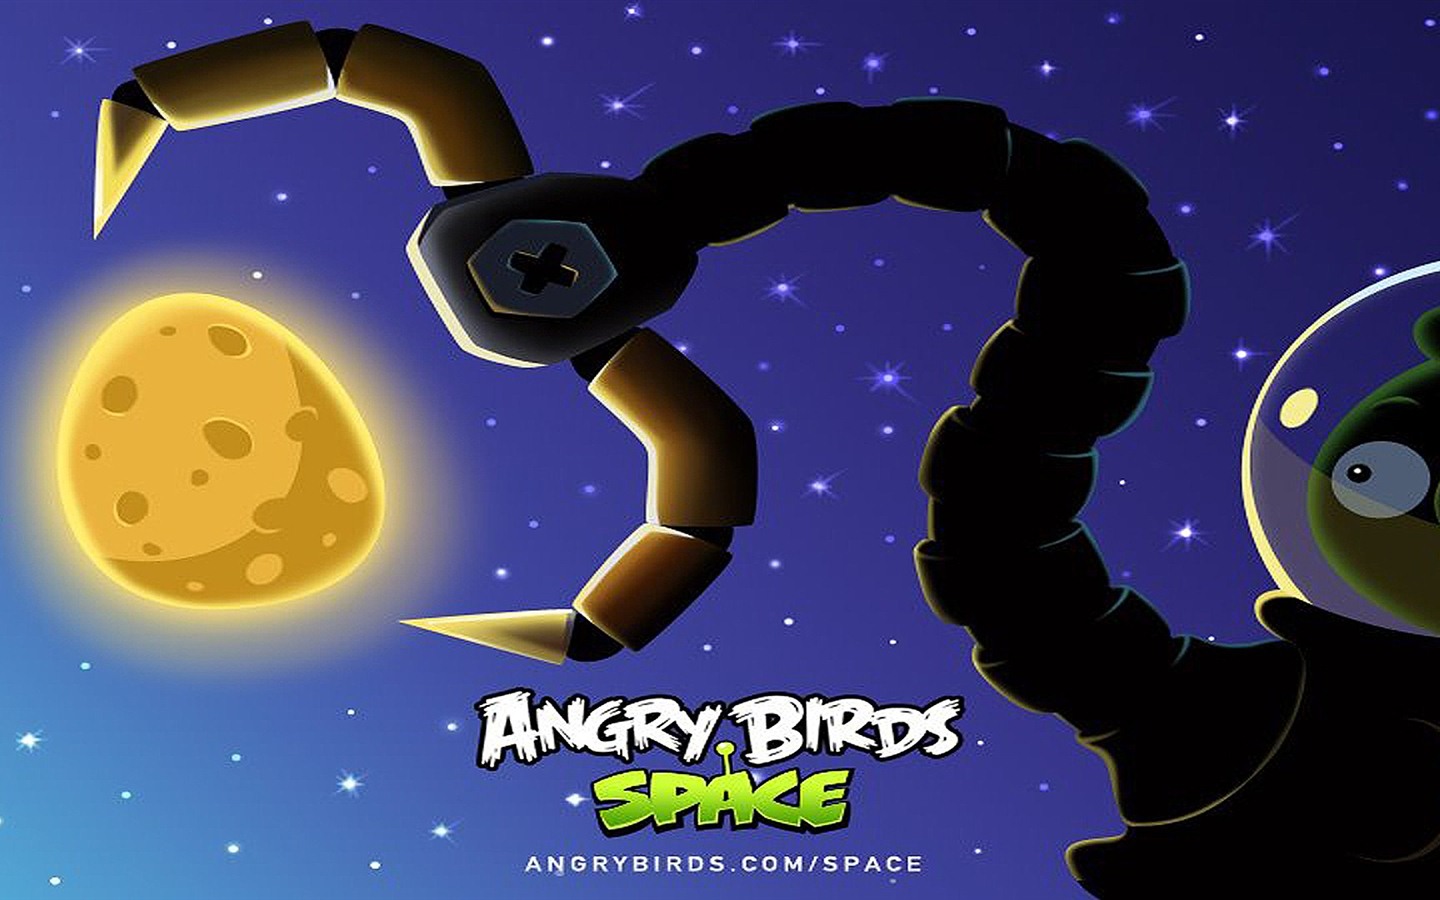 Angry Birds Game Wallpapers #24 - 1440x900